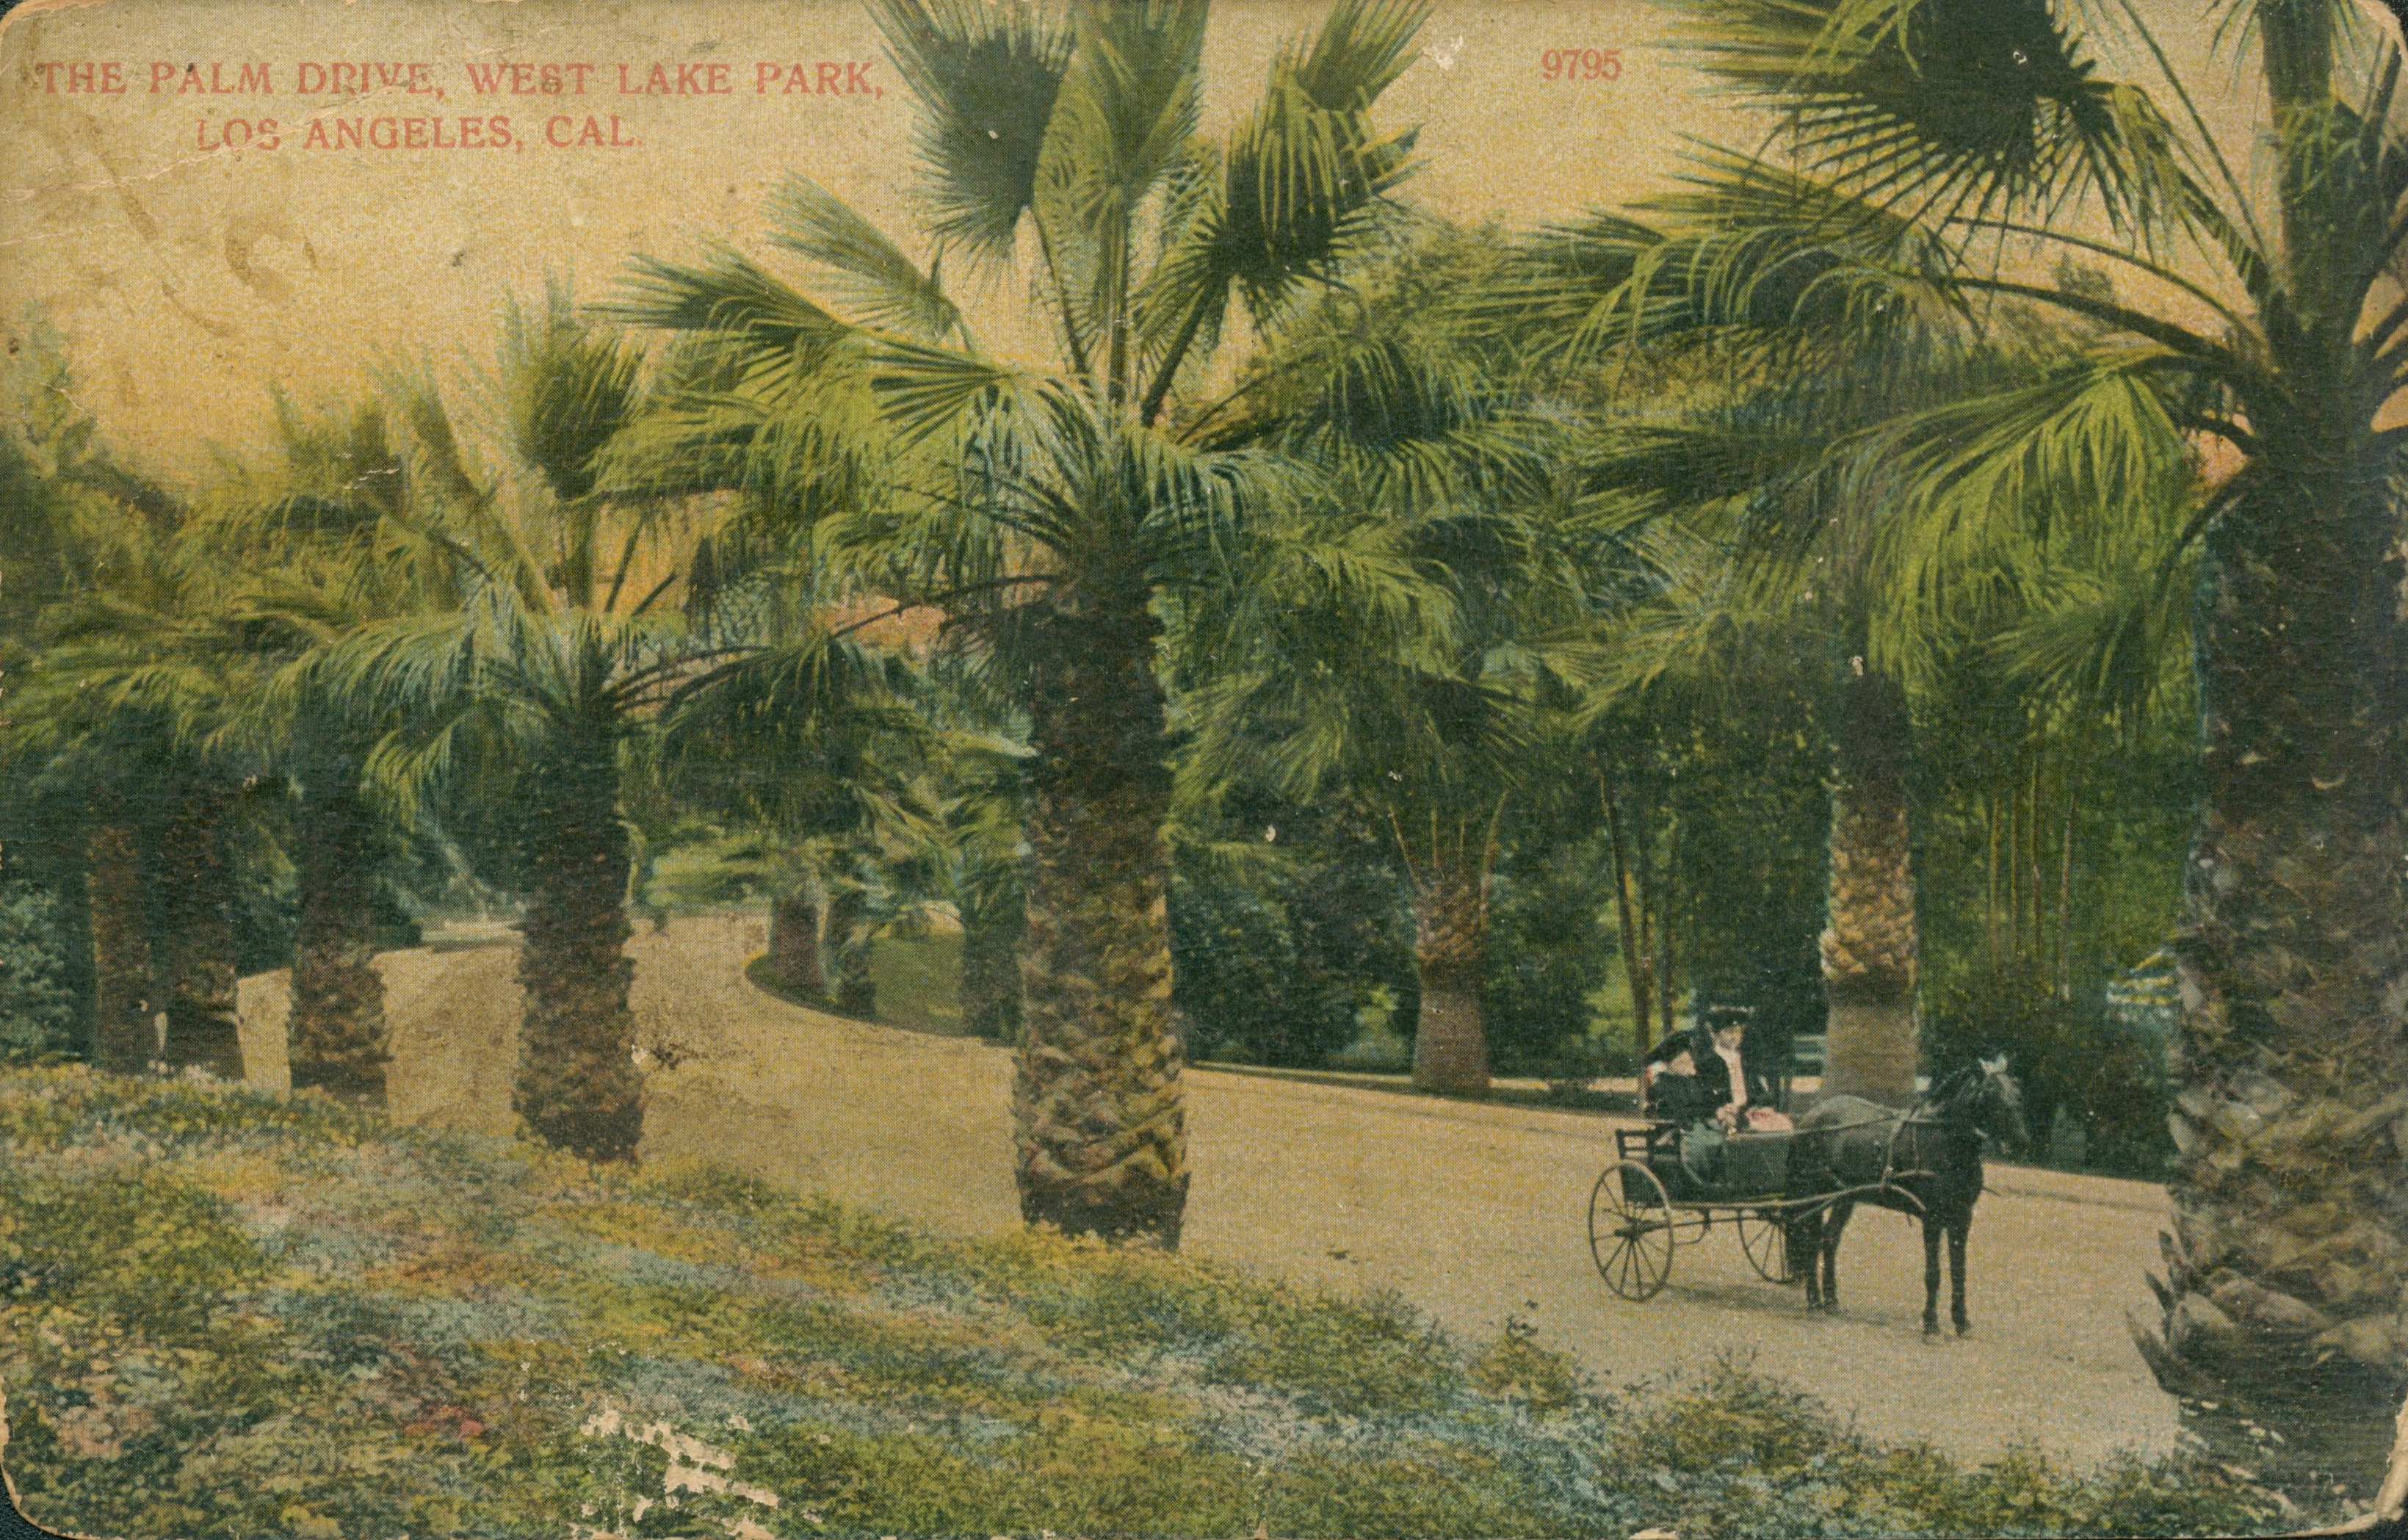 This postcard shows a woman driving a horse-drawn cart down a palm-lined street.